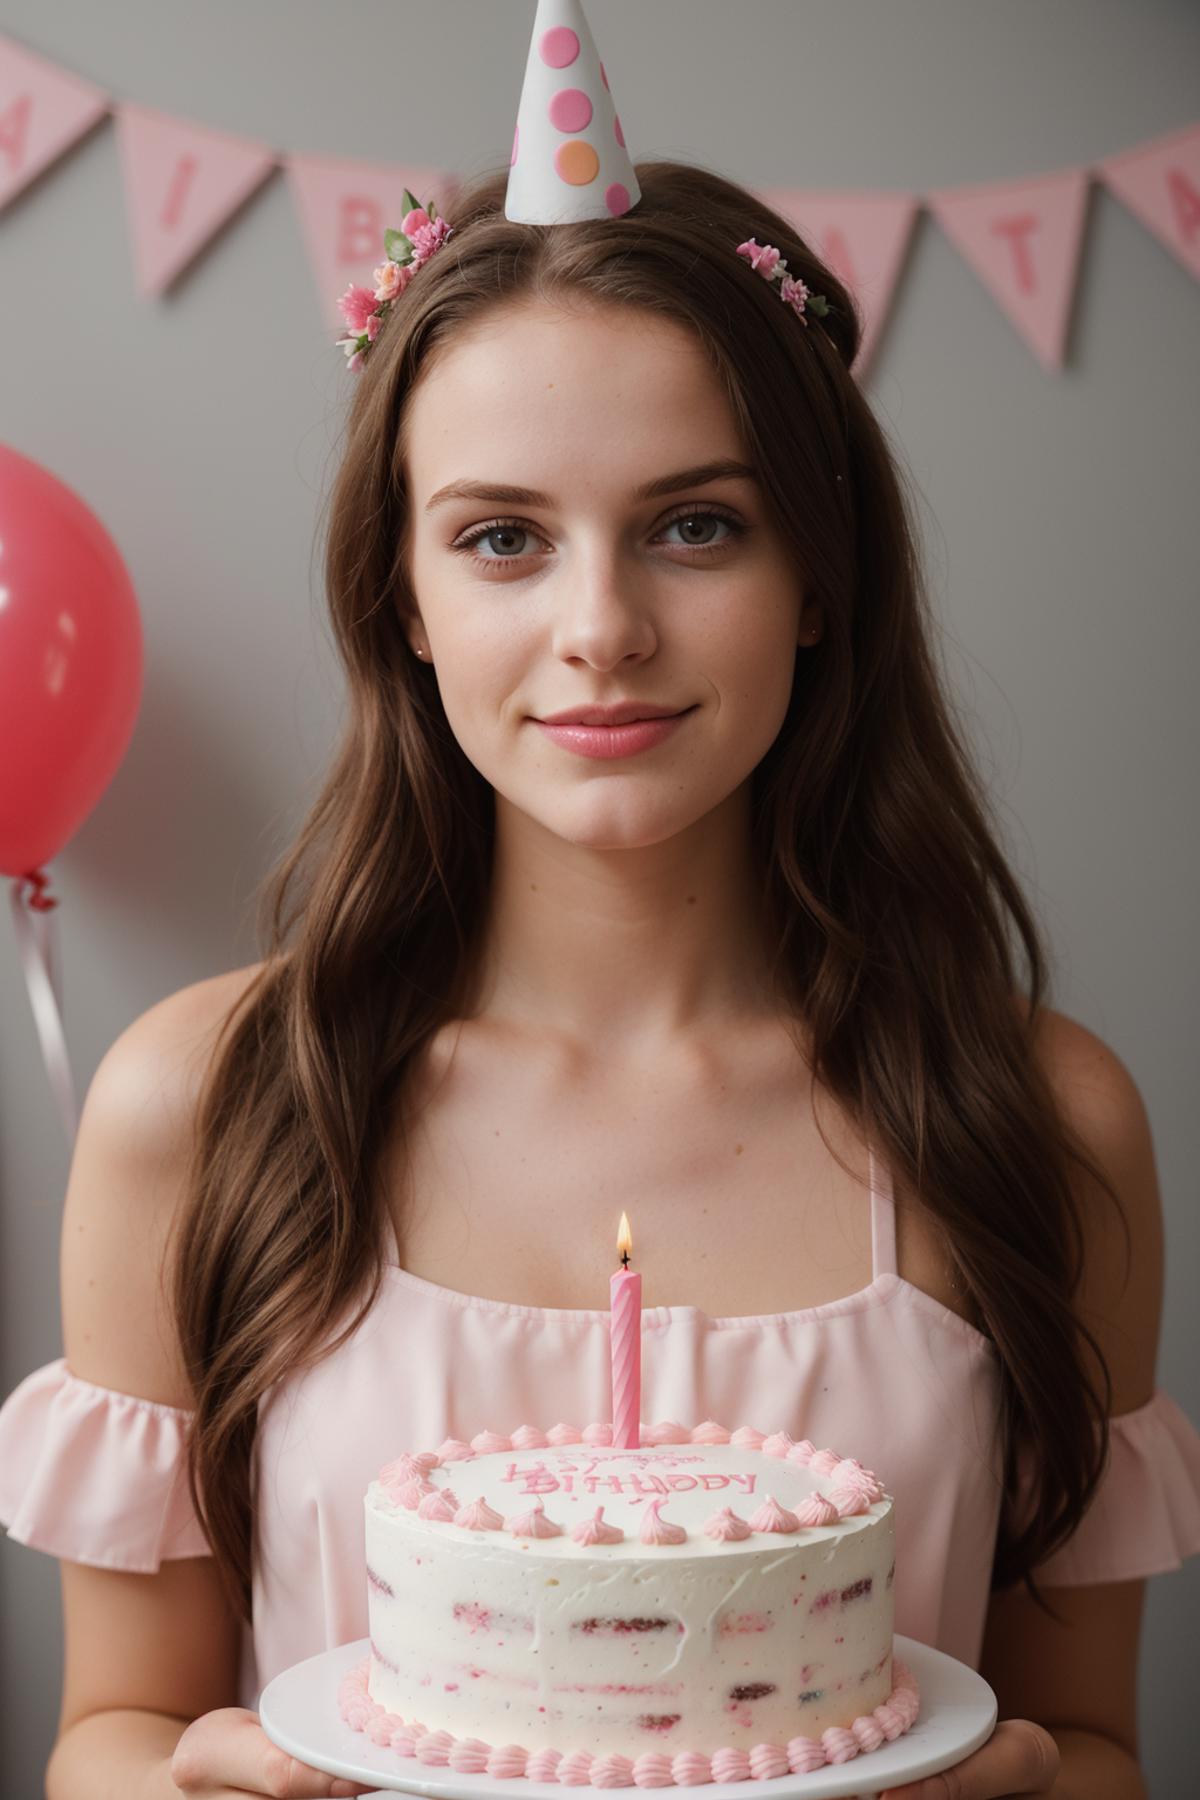 A young girl wearing a pink dress and a flower crown is seen blowing out candles on her birthday cake.